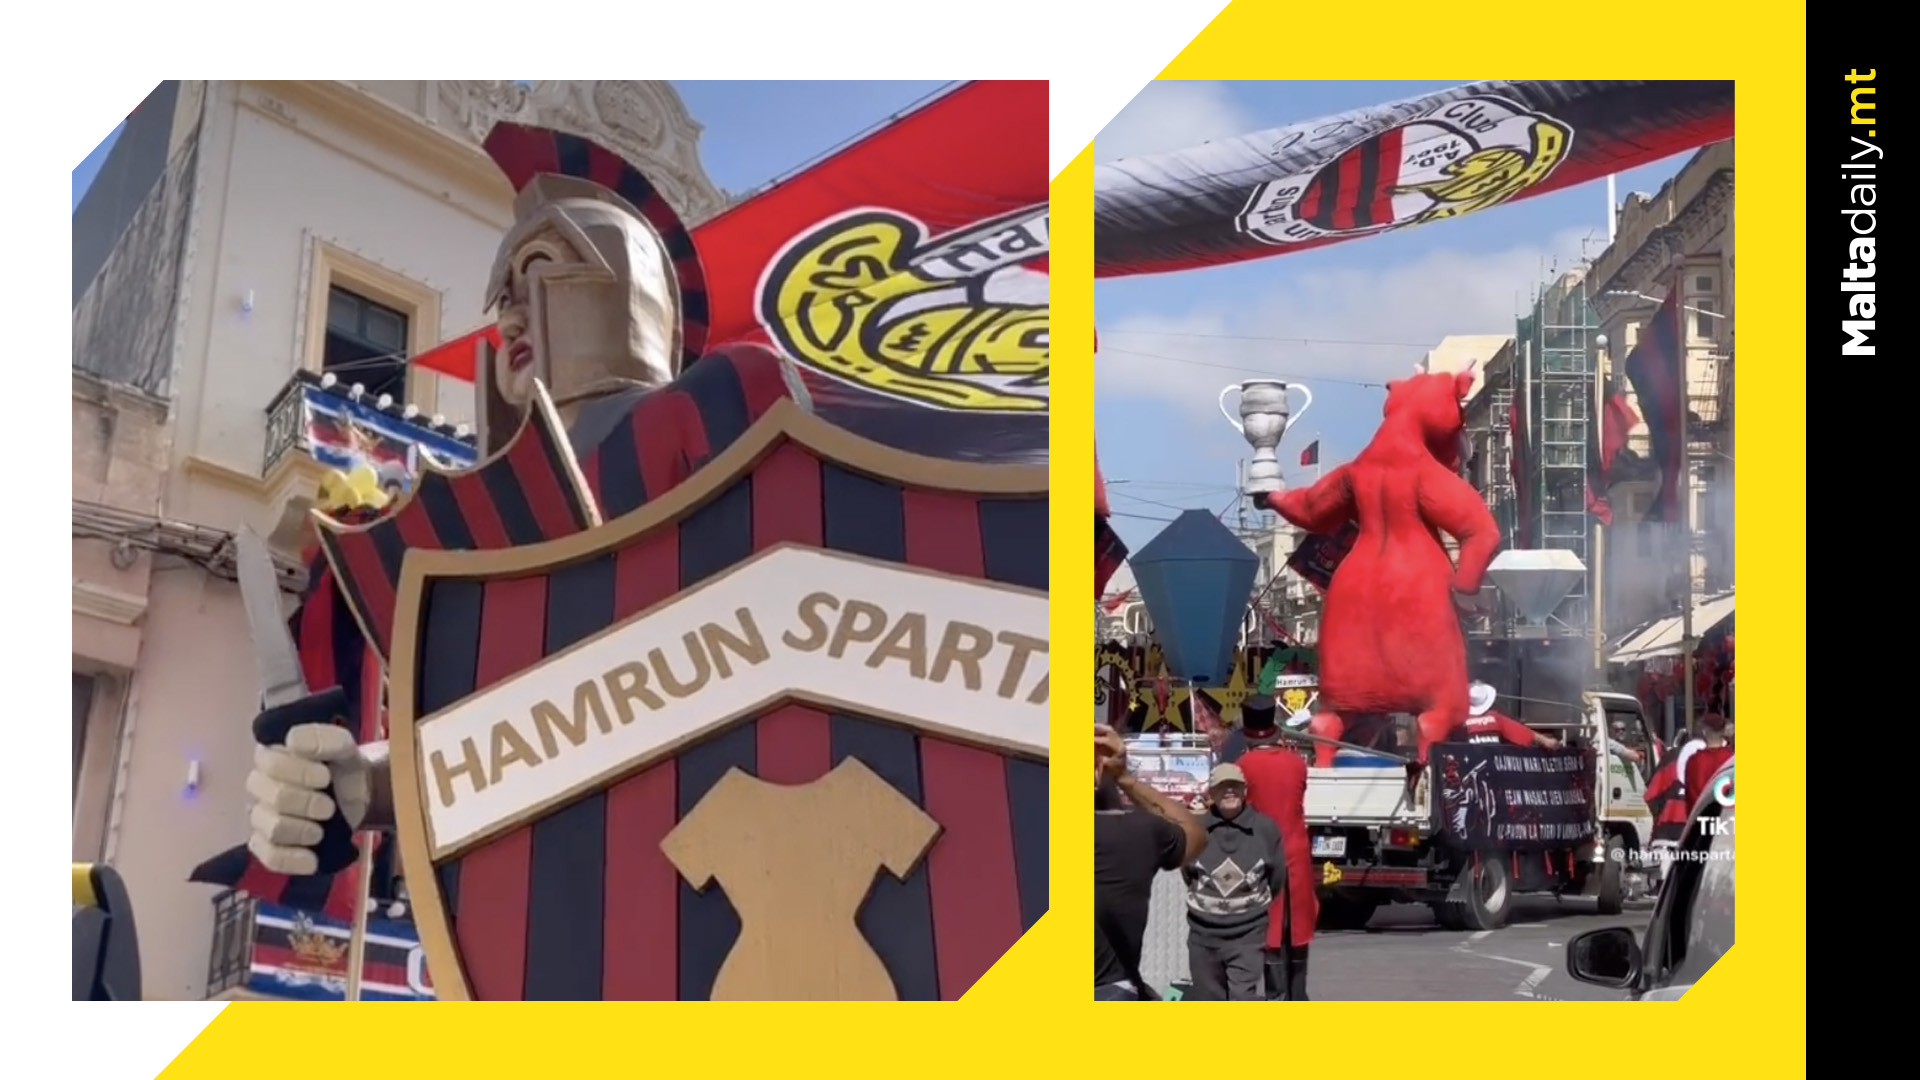 Fans, floats & festivities: Hamrun streets come alive at Spartans' morning celebrations